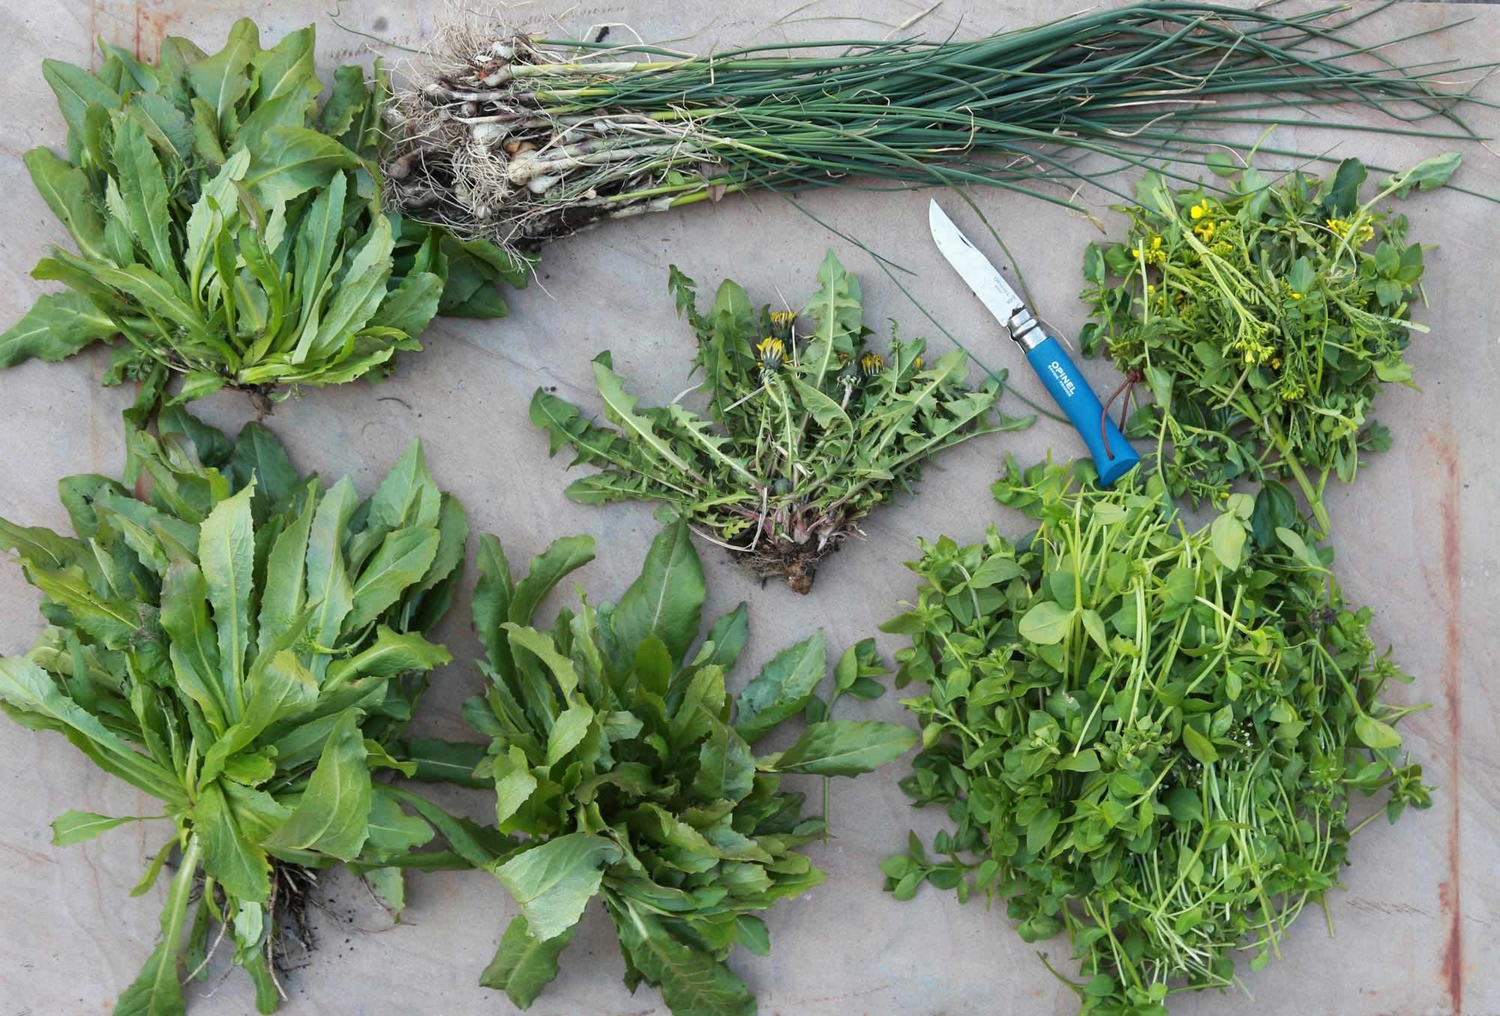 a selection of invasive, edible weeds on a gray surface, with a knife among them